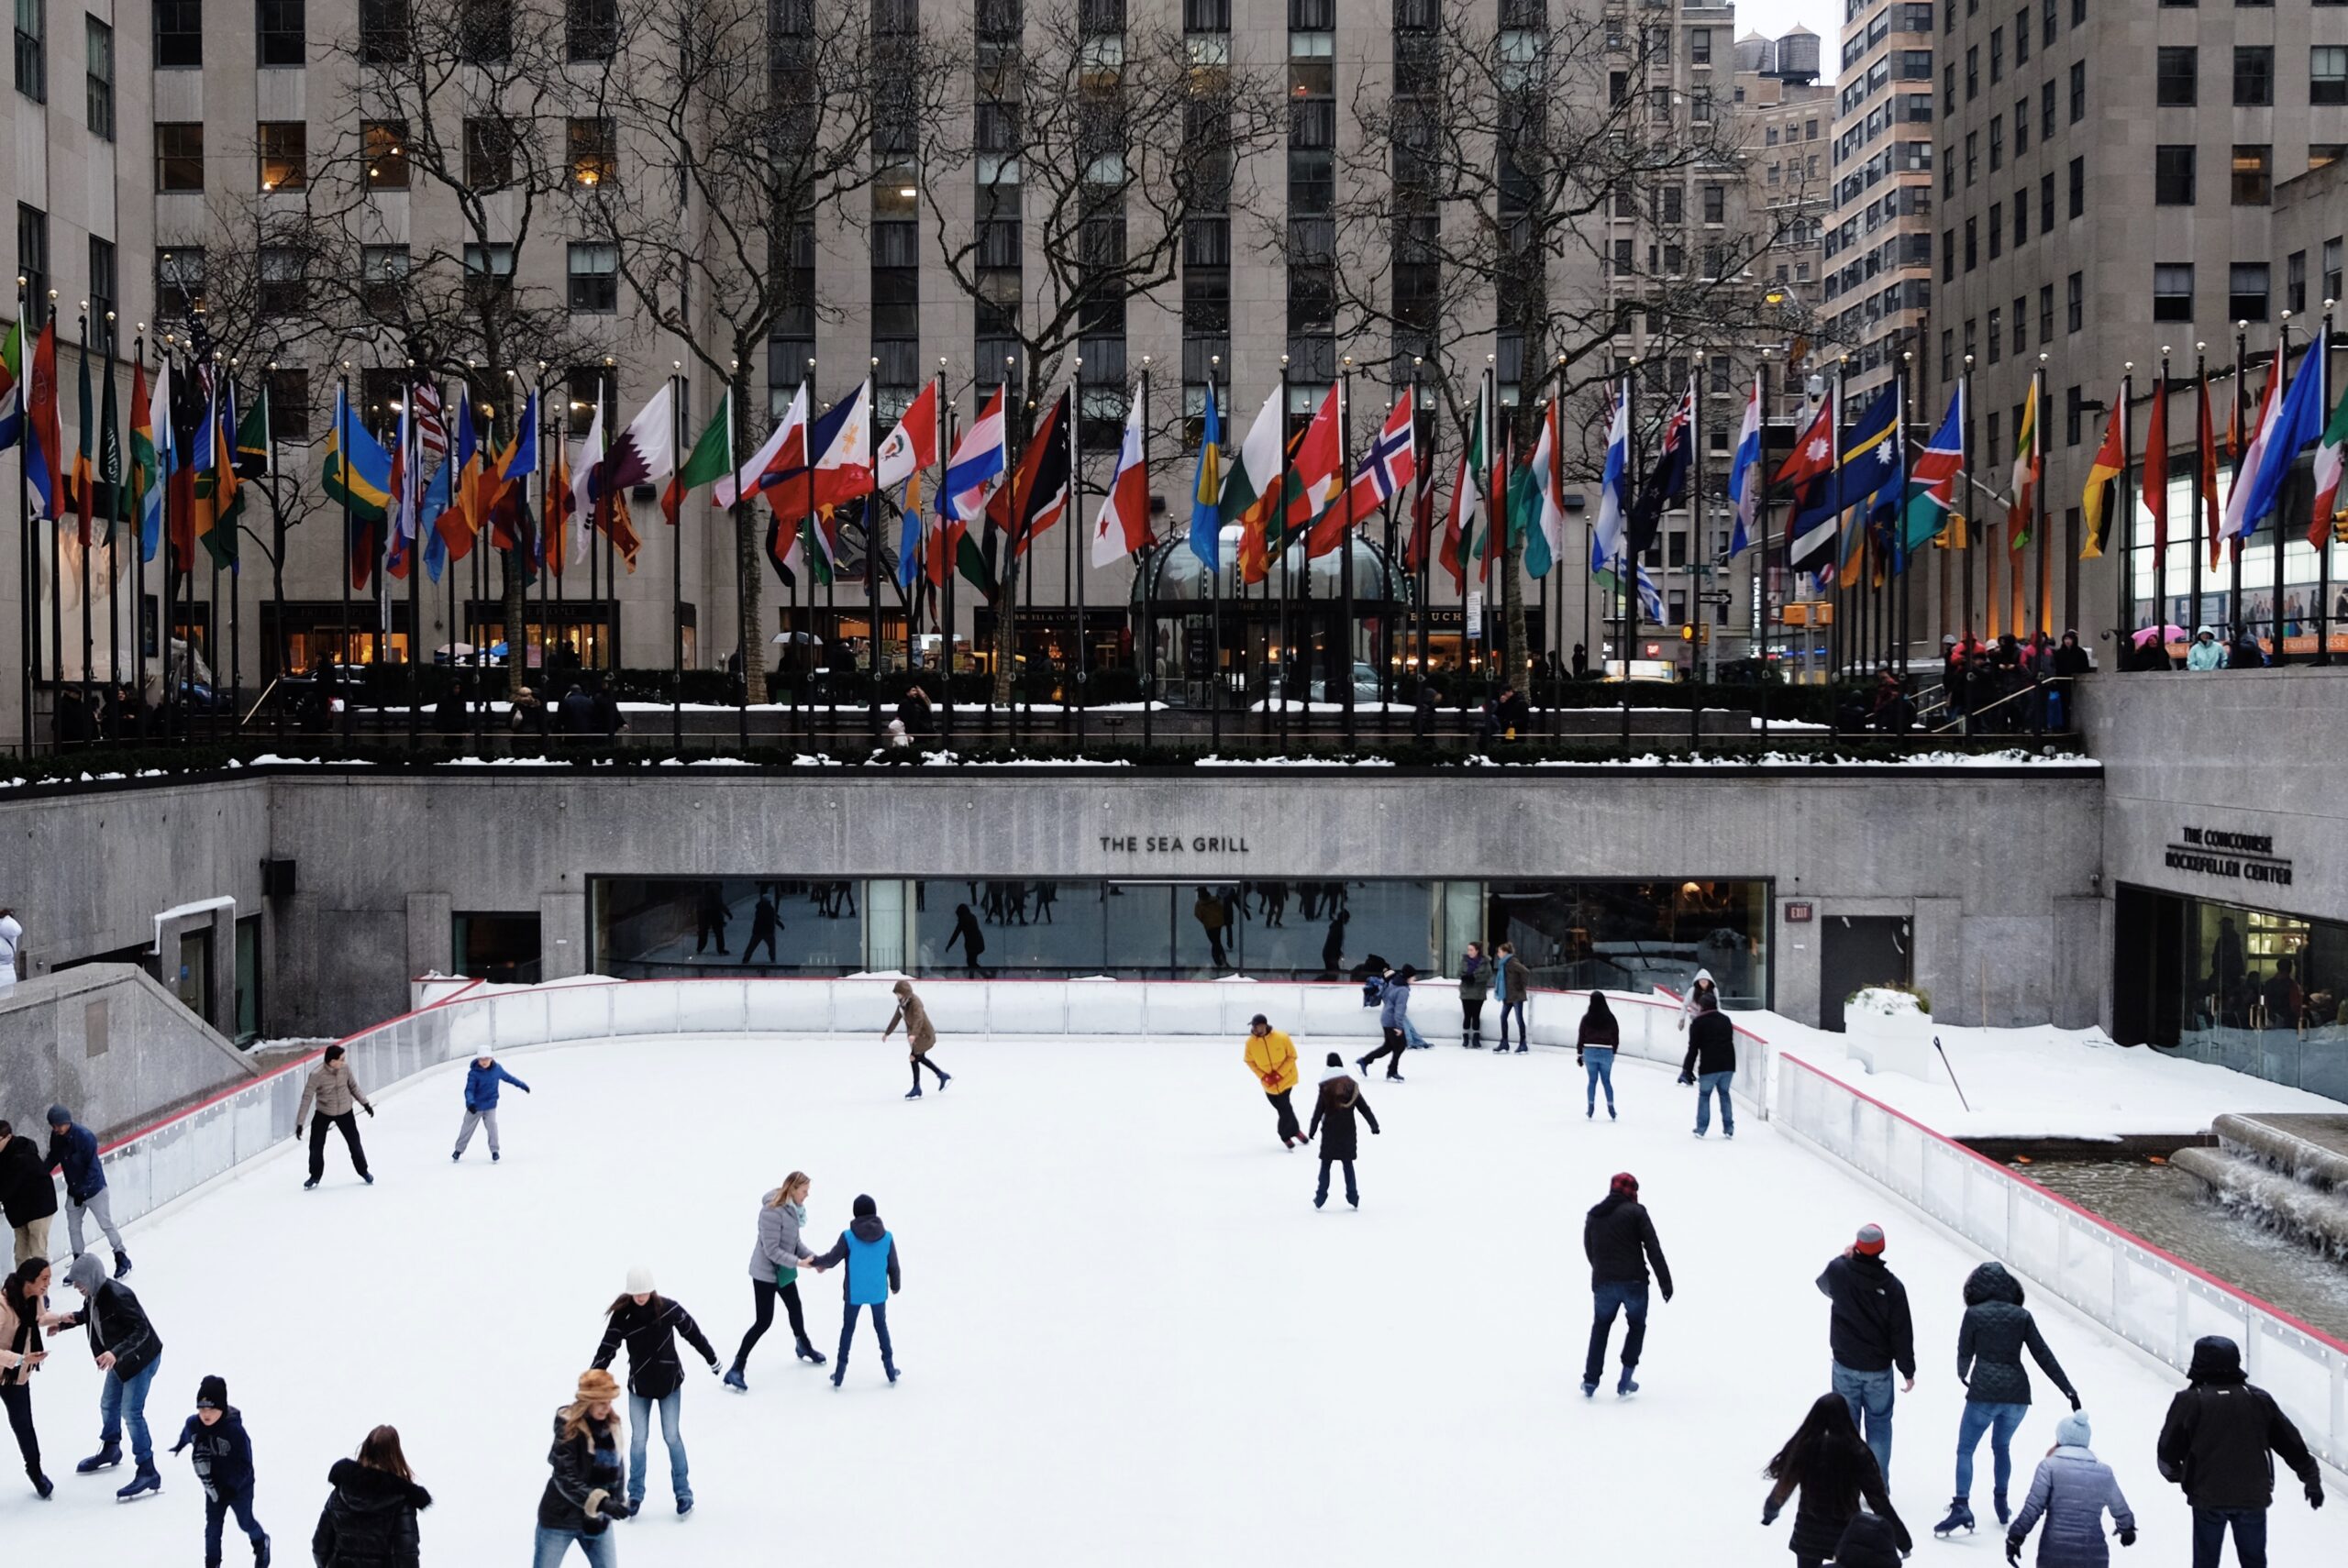 NYC in the winter is almost like another world, check out the Central Park winter activities. 
Pictured: people ice skating at the Rockefeller Center rink 